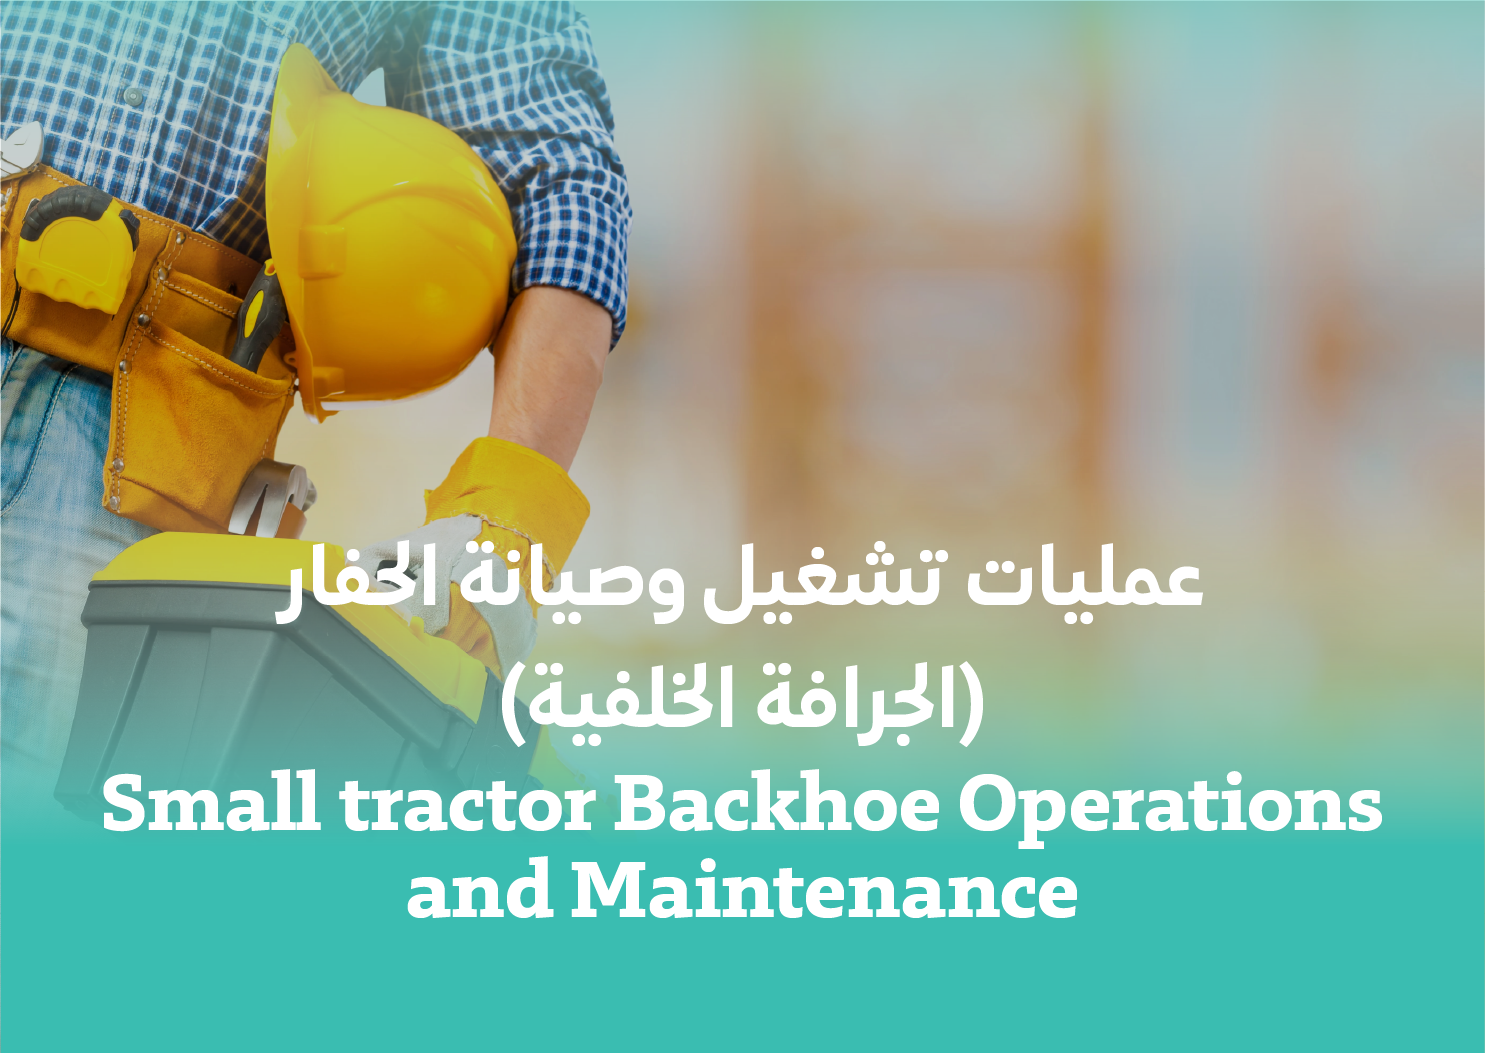 Small Tractor Backhoe Operations and Maintenance